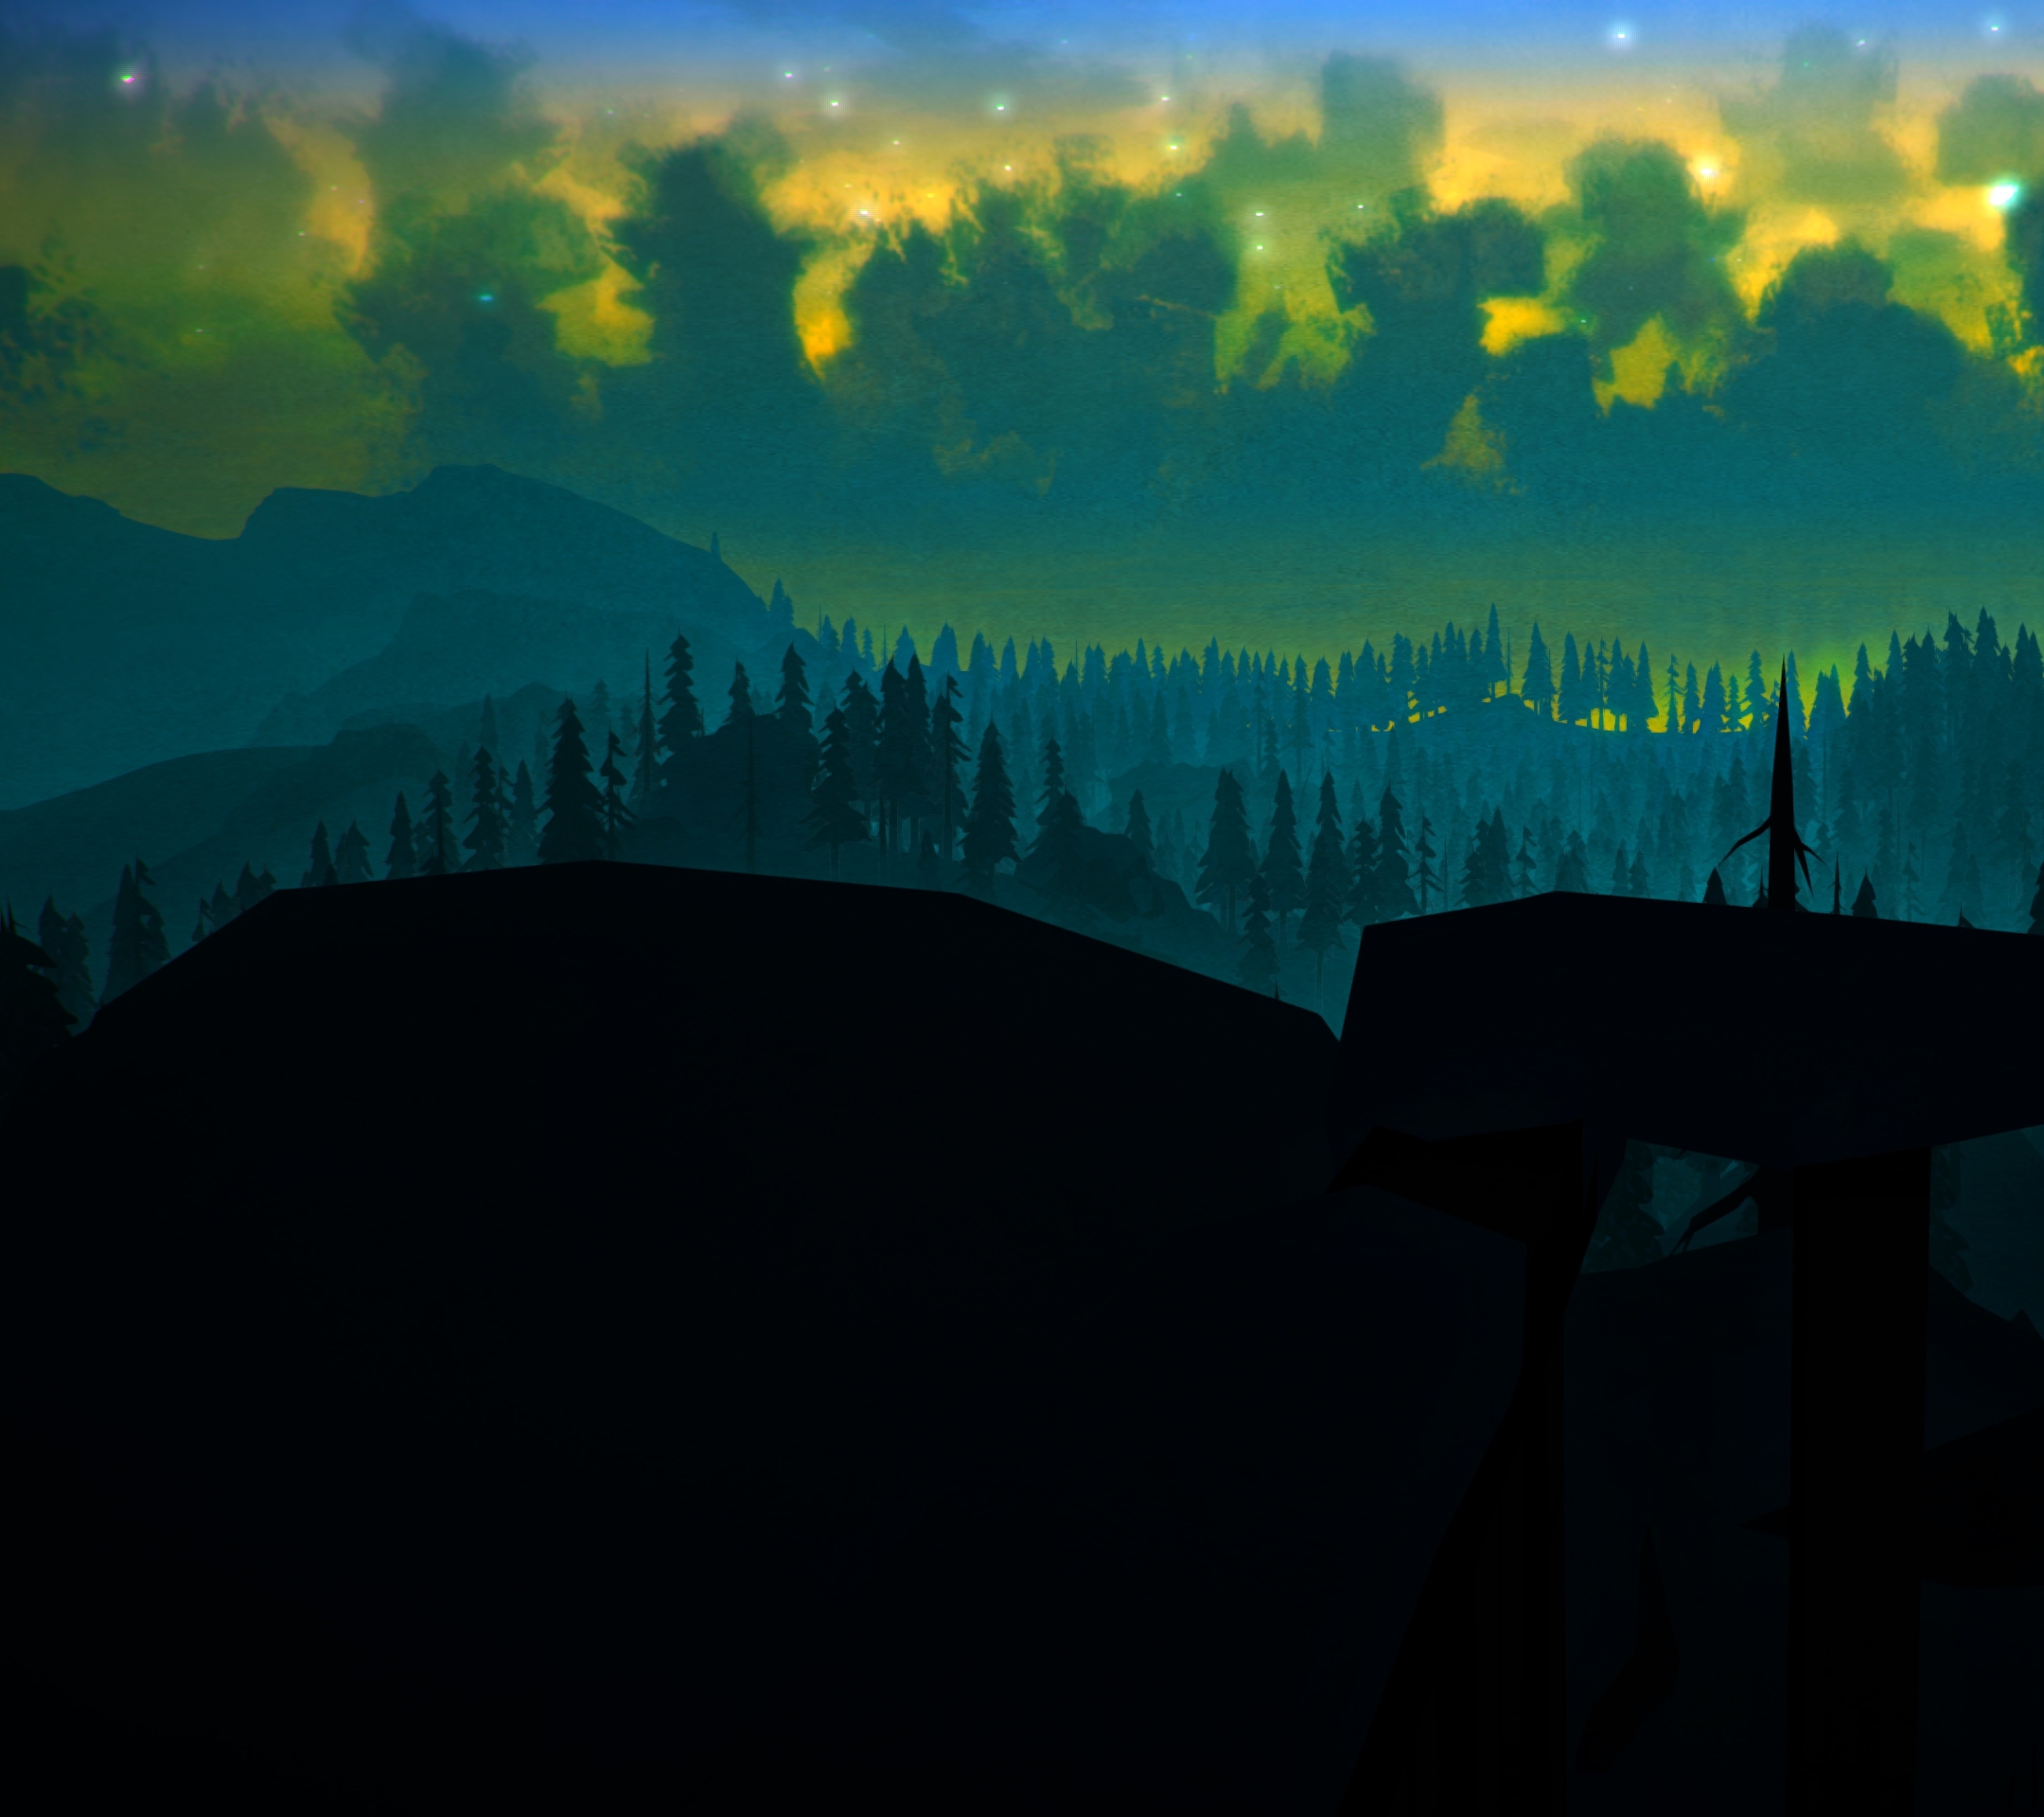 video game, the long dark